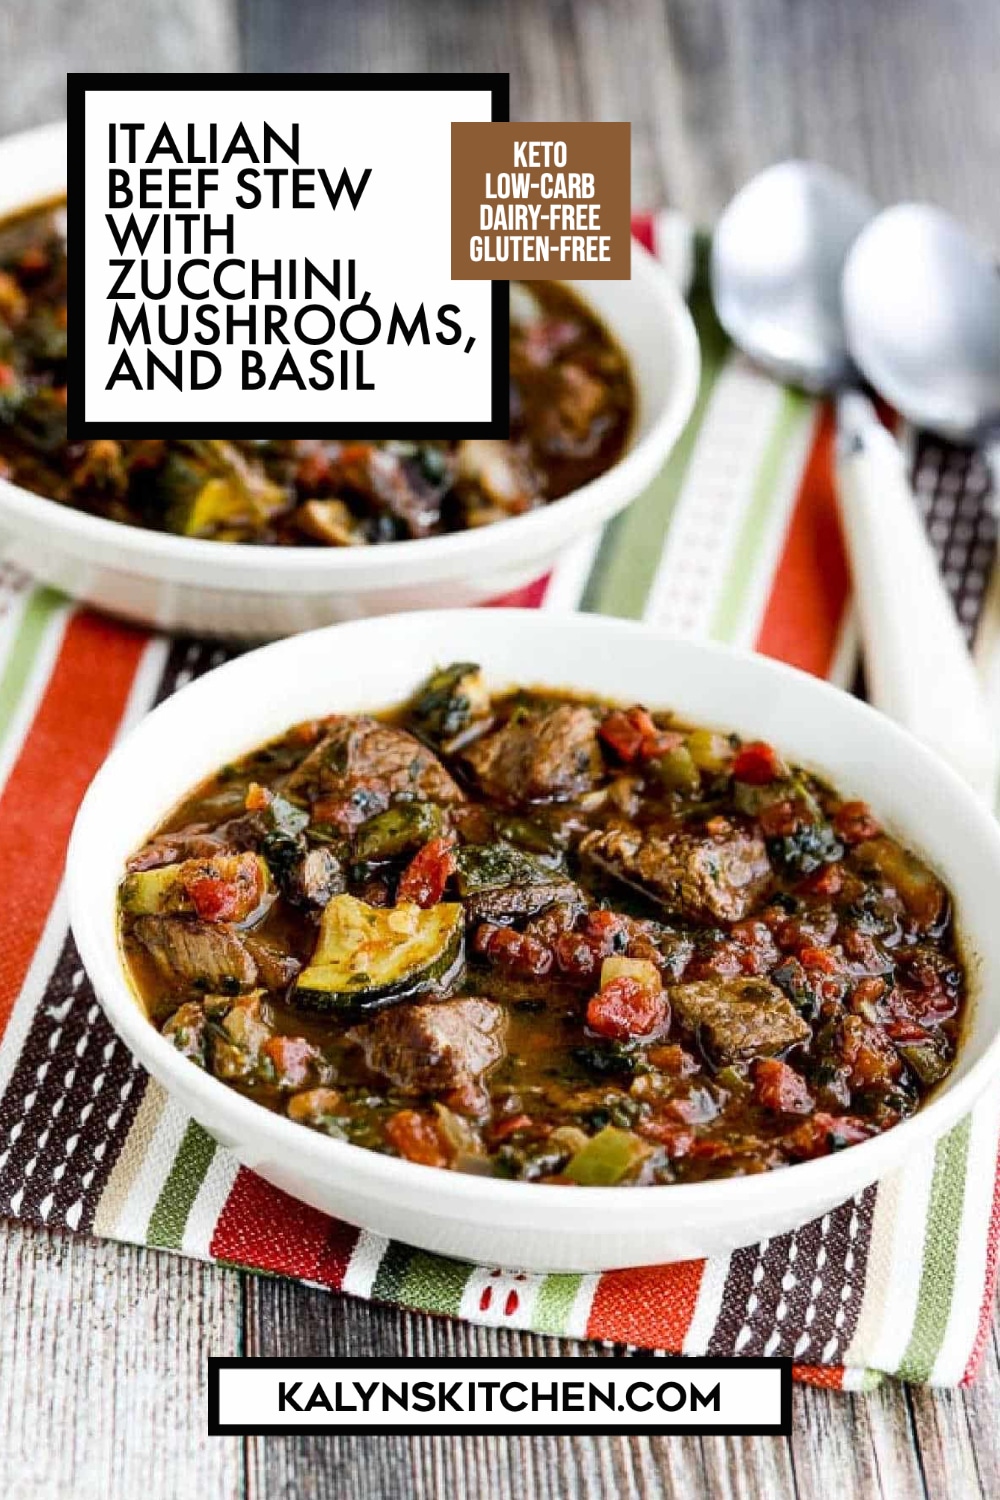 Pinterest image of Italian Beef Stew with Zucchini, Mushrooms, and Basil